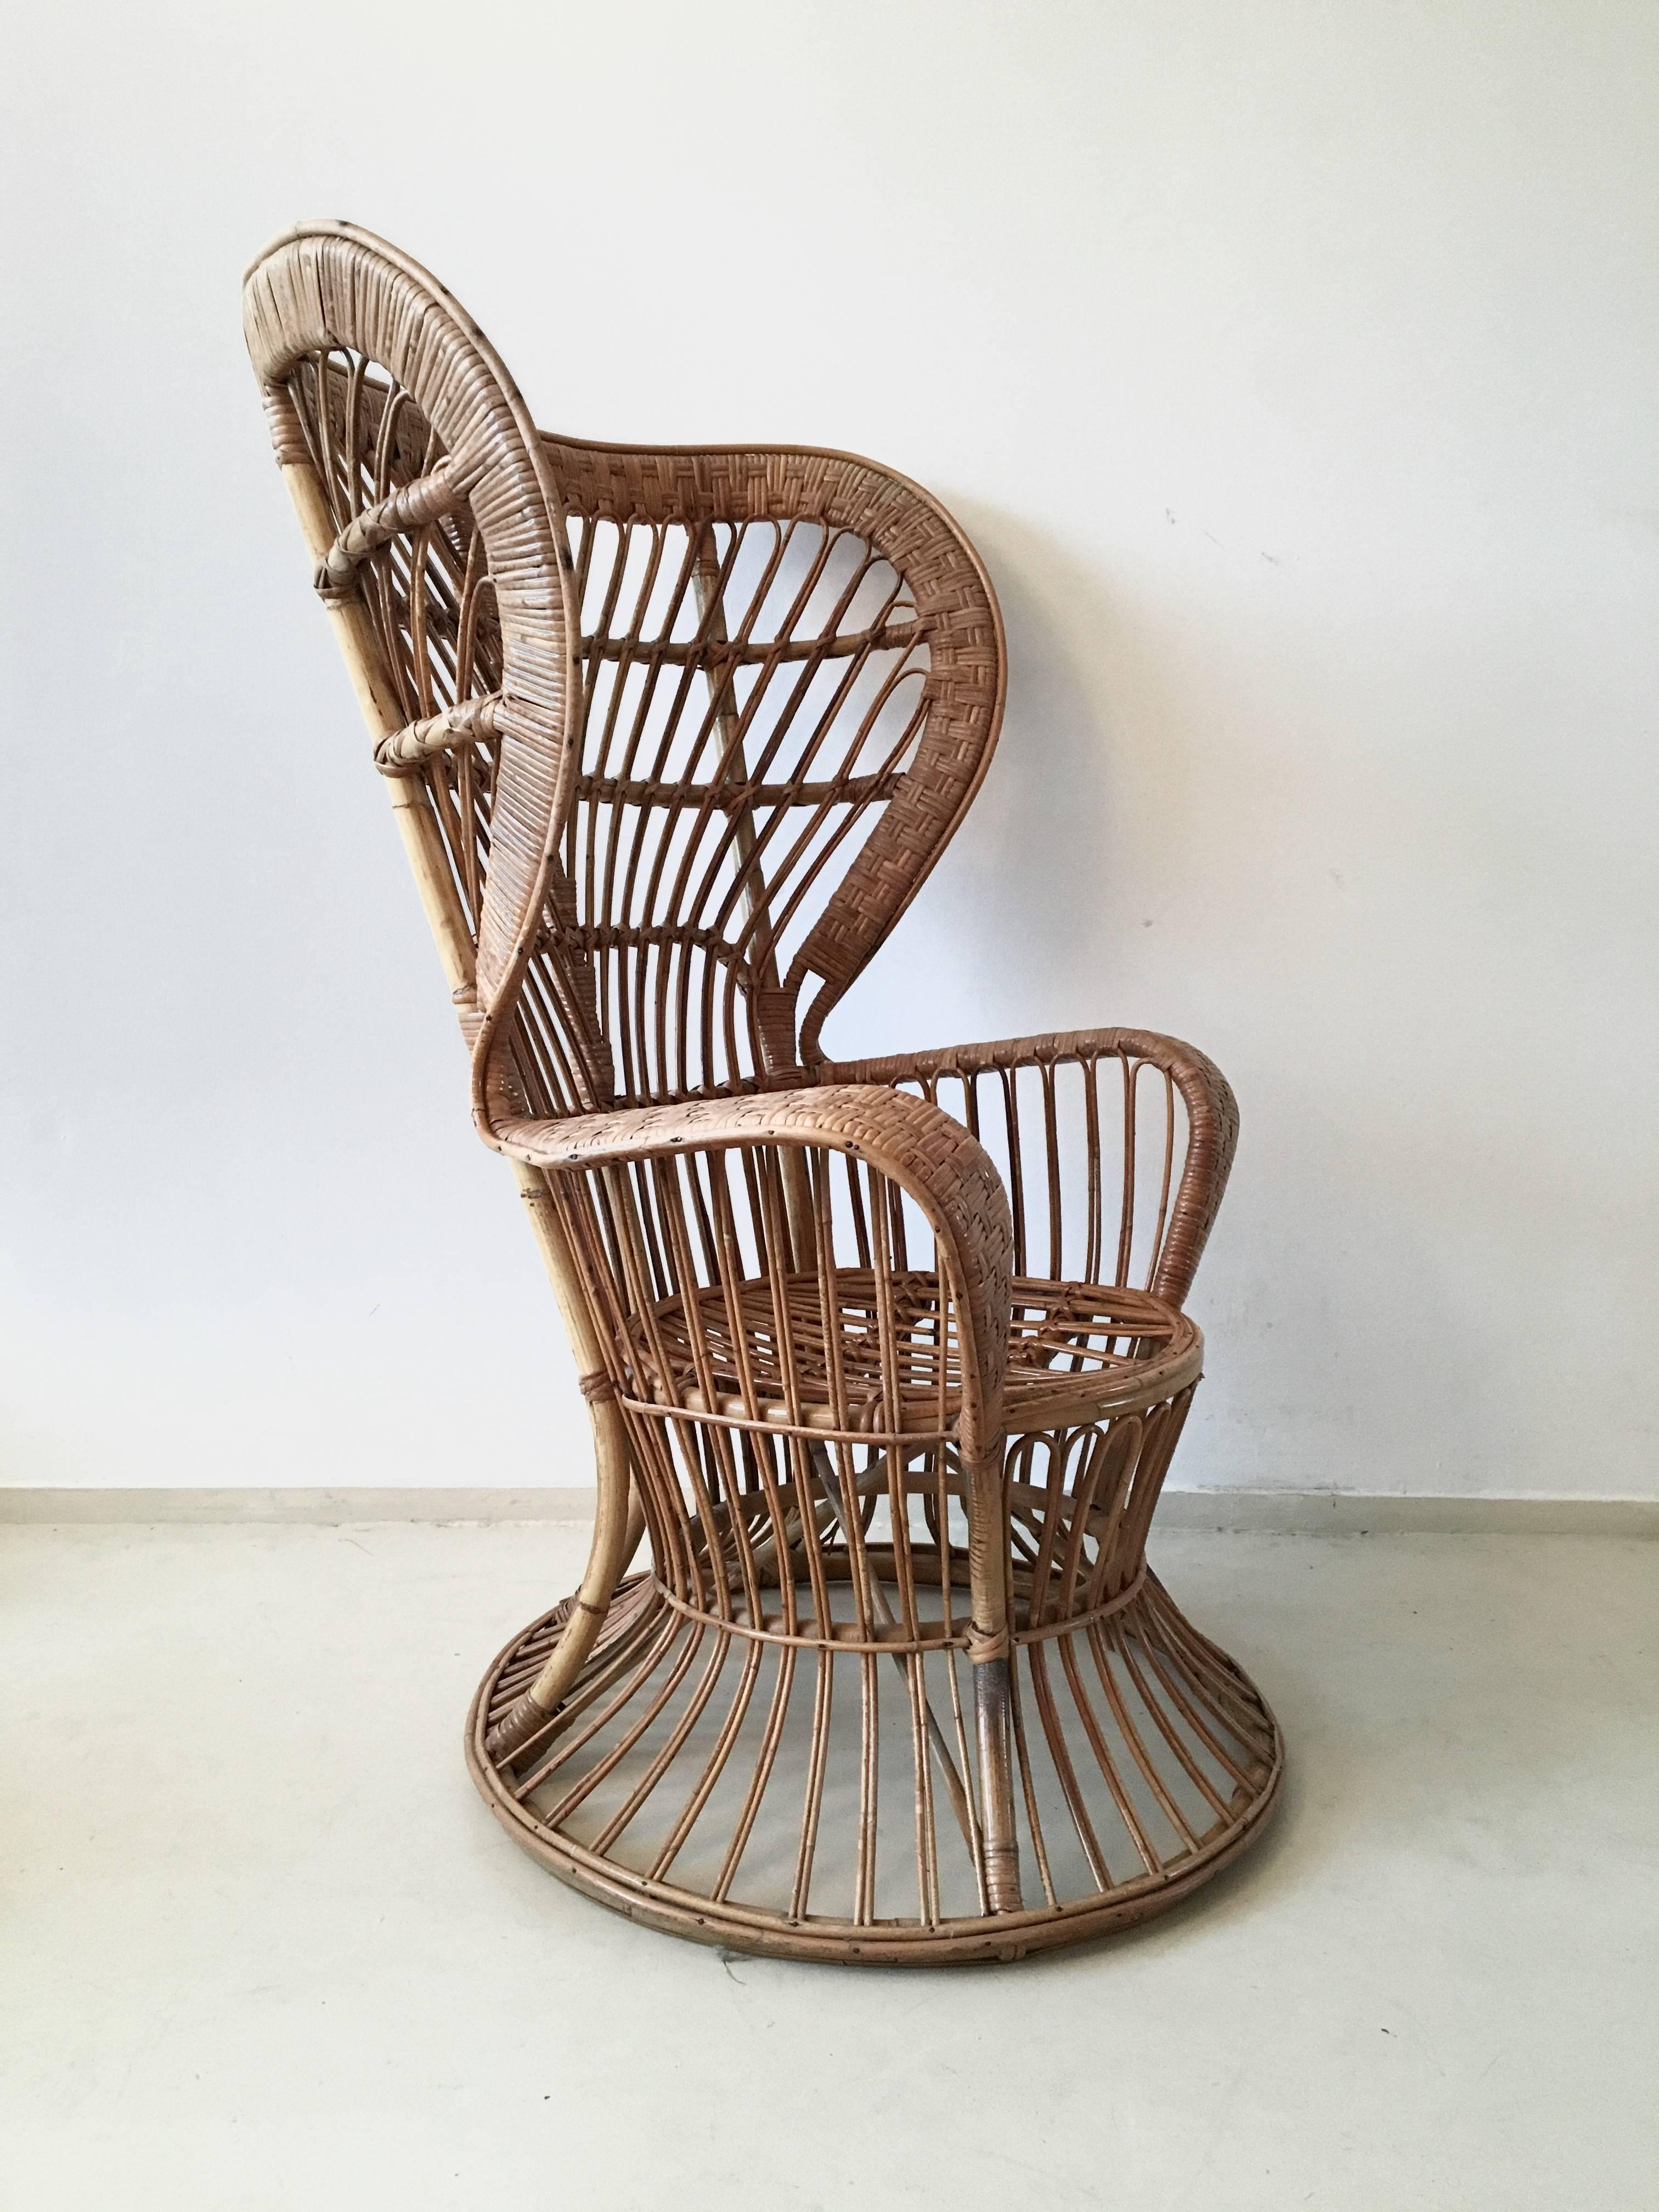 This beautiful rattan armchair was designed in style of Gio Ponti and Lio Carminati. It was manufactured in Italy and designed as the cruiser's Conte Biancamano chair. The chair remains in a good condition and has some straws of rattan